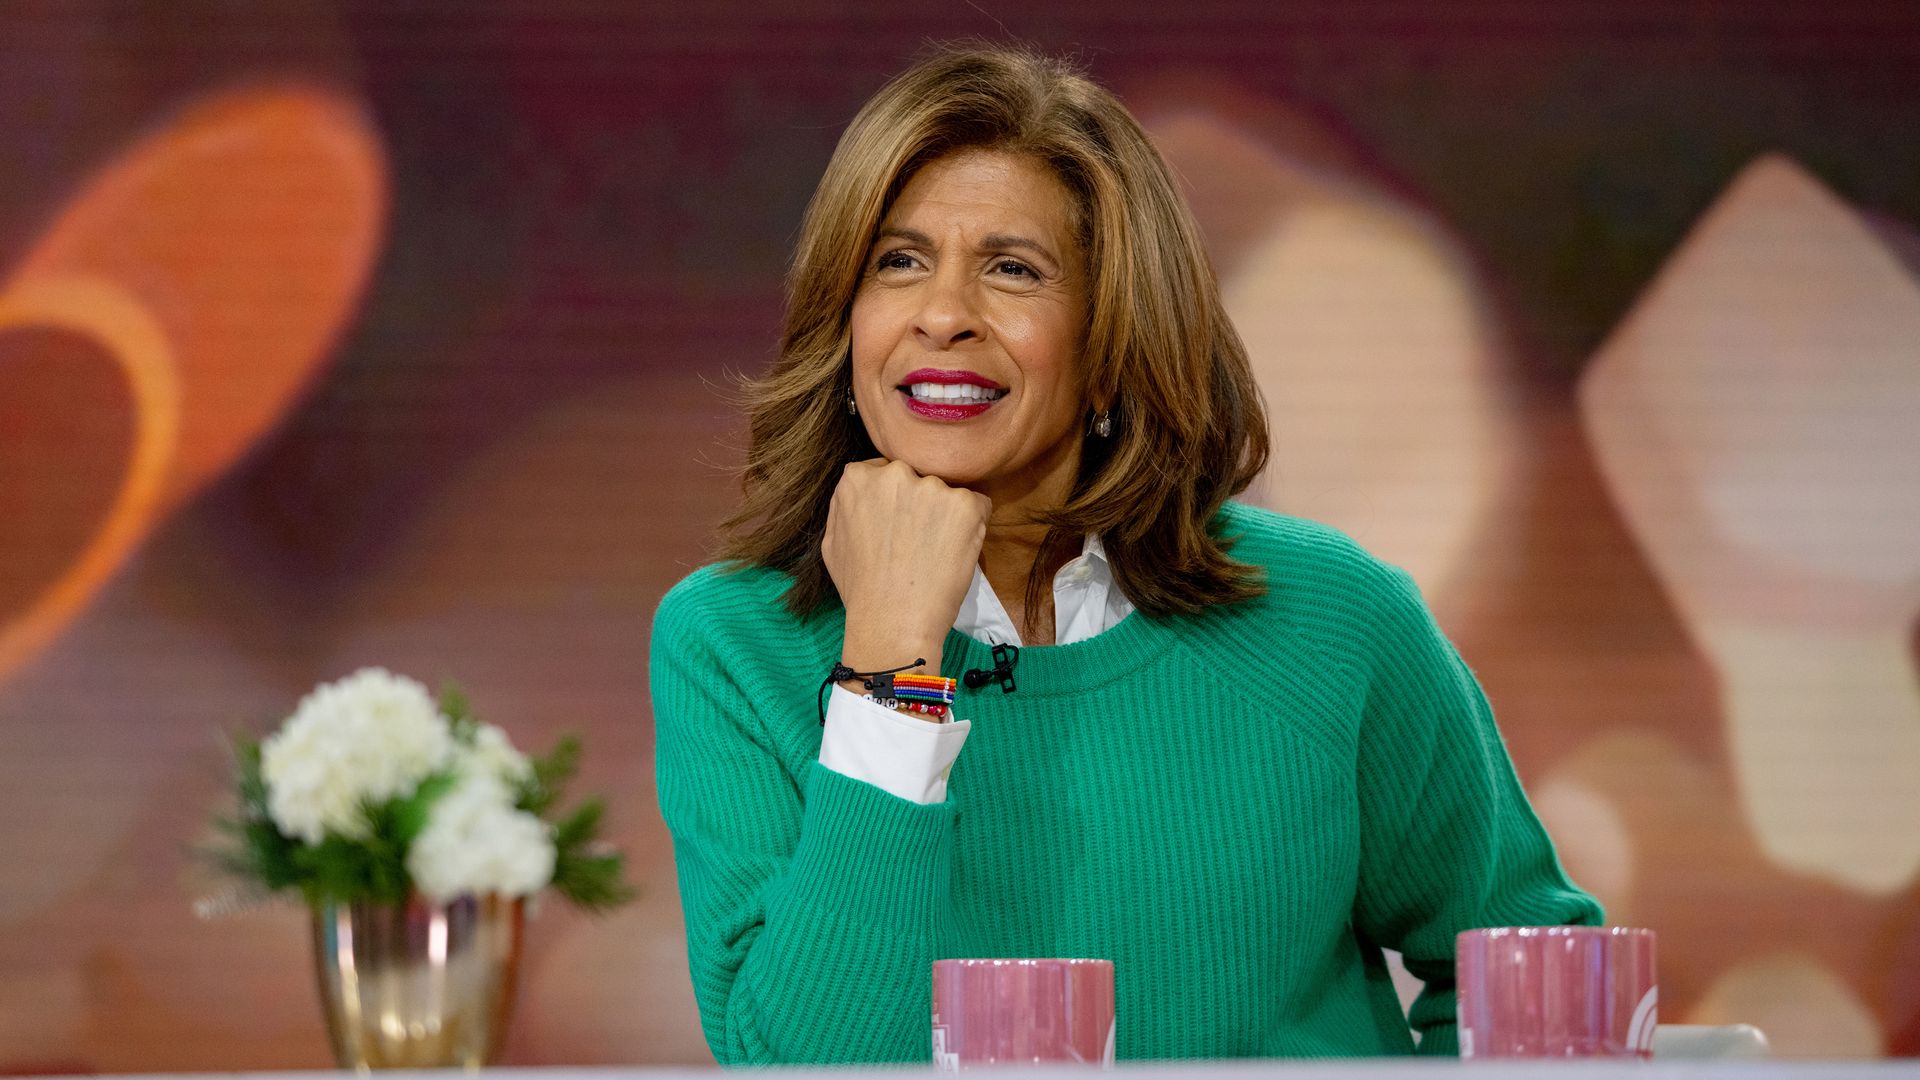 Hoda Kotb teases major change at Today as show headed for transformation